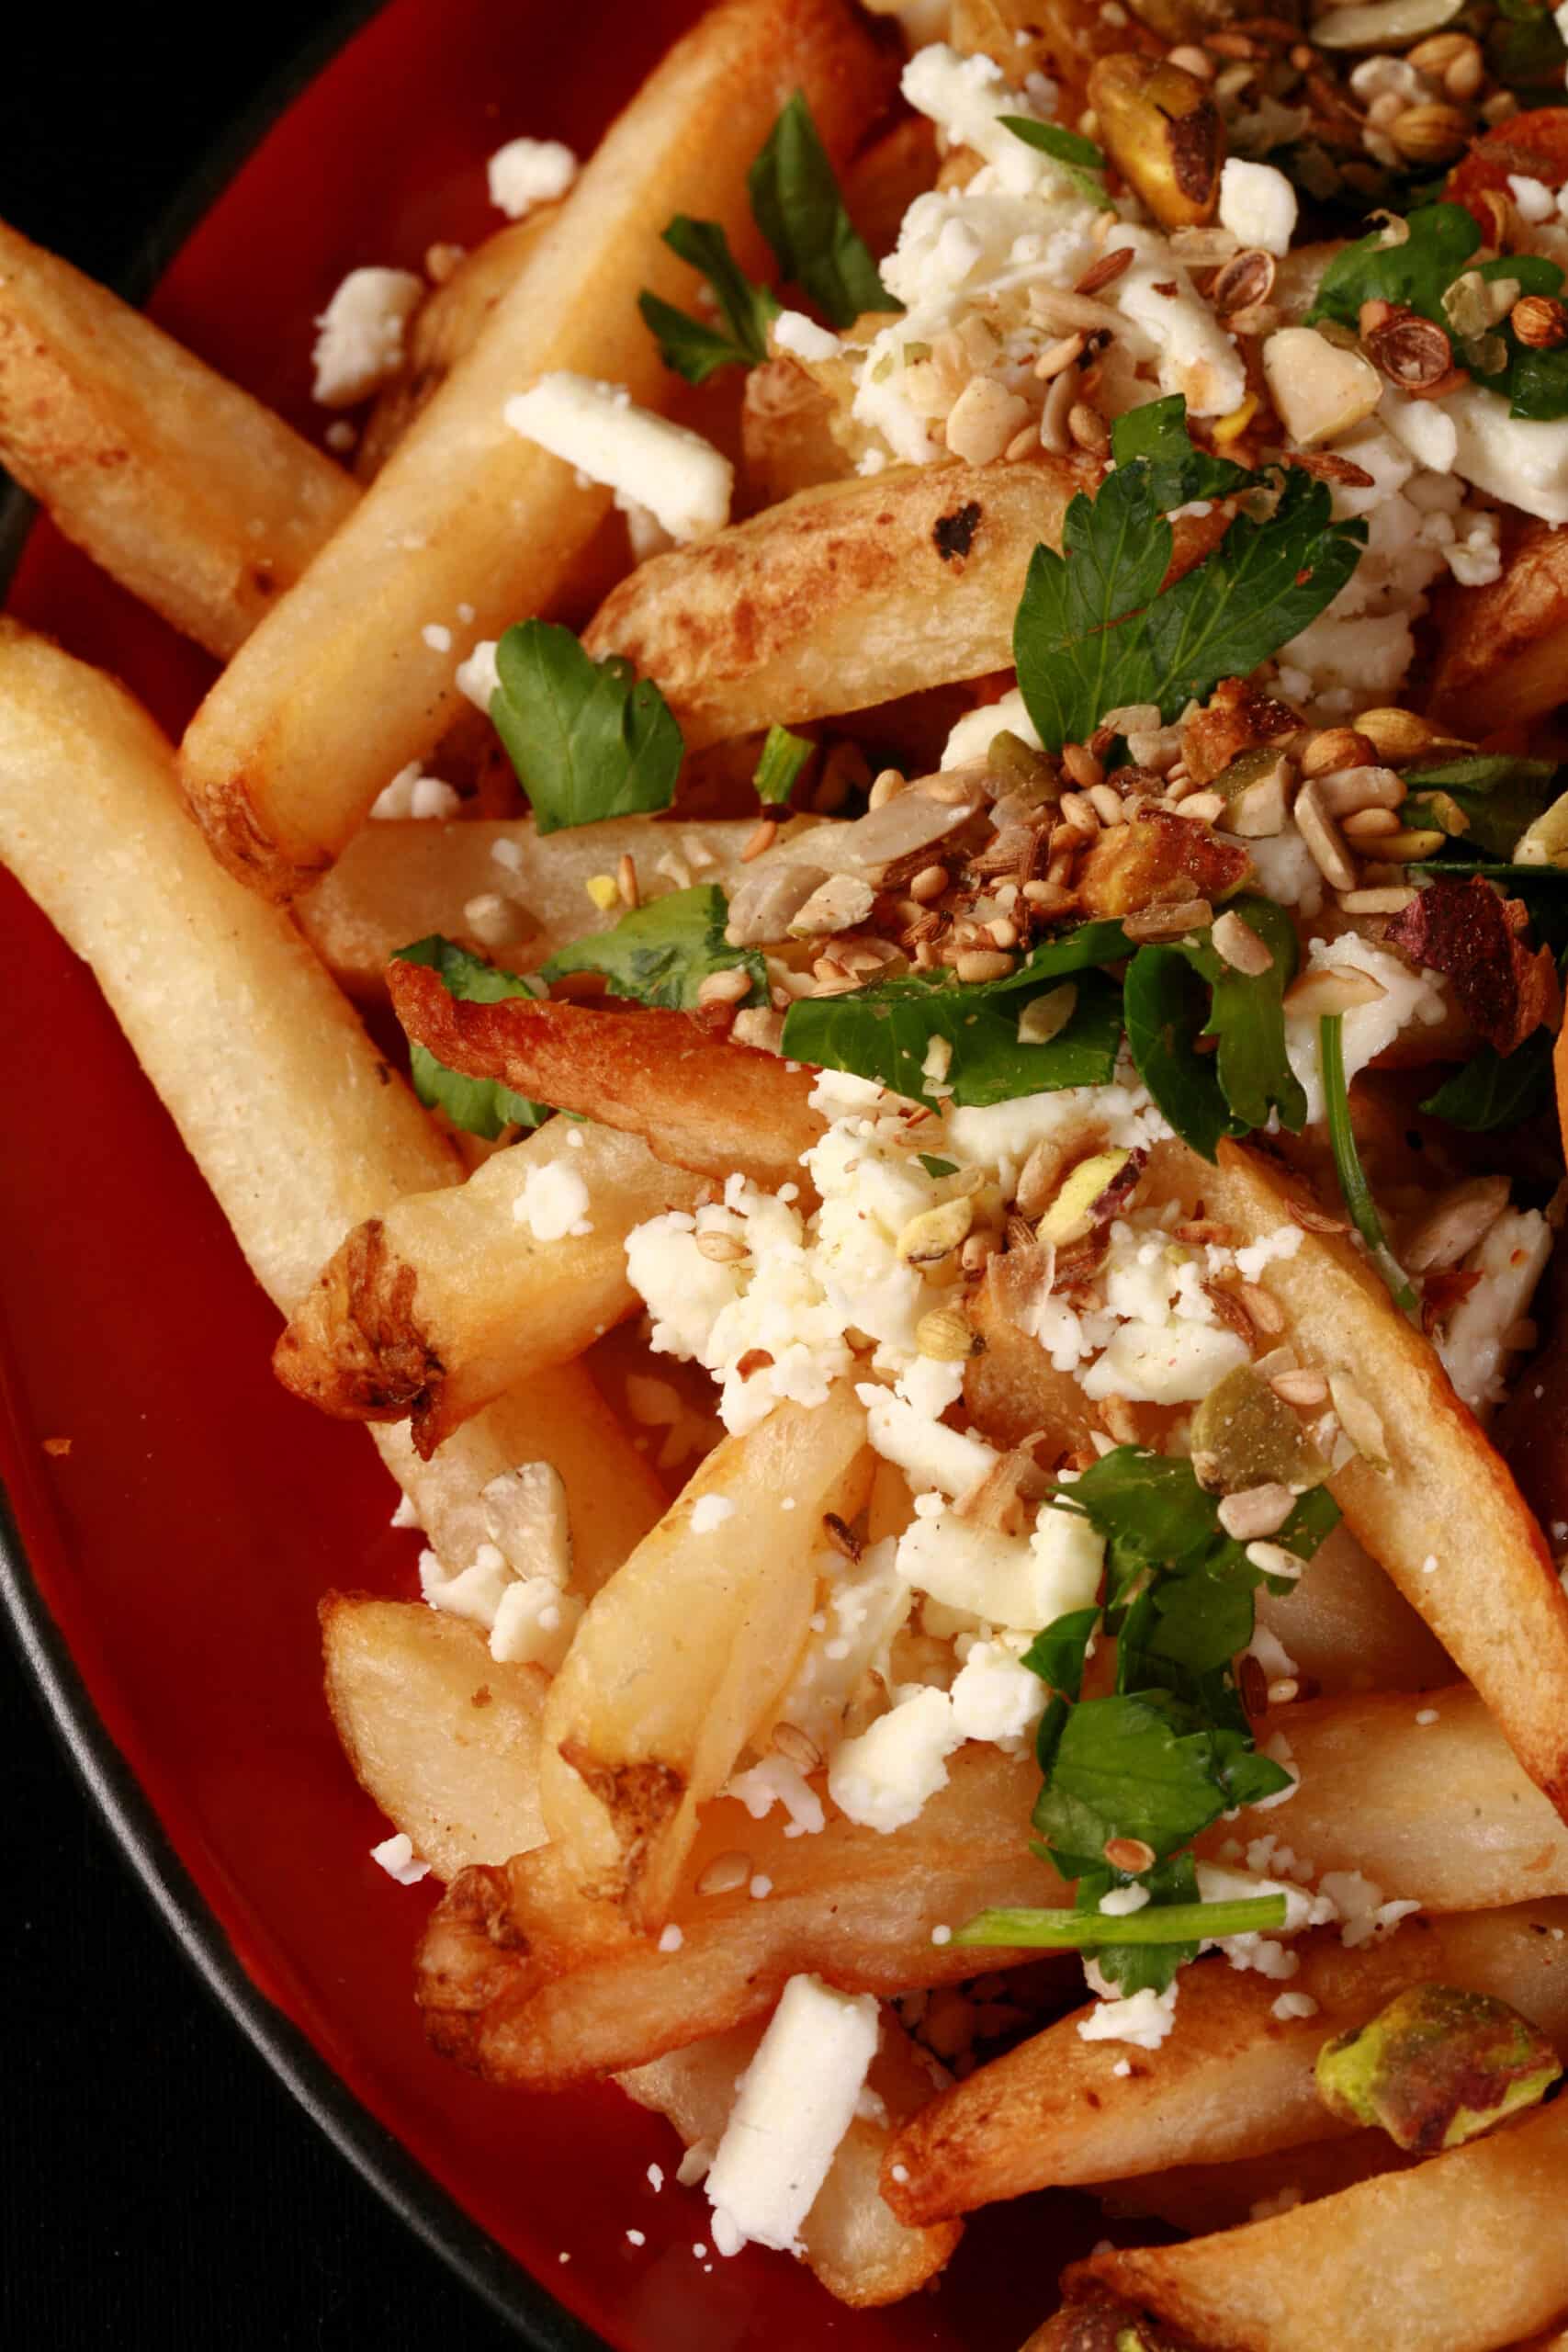 Fries with feta, dukkah, mint, and parsley